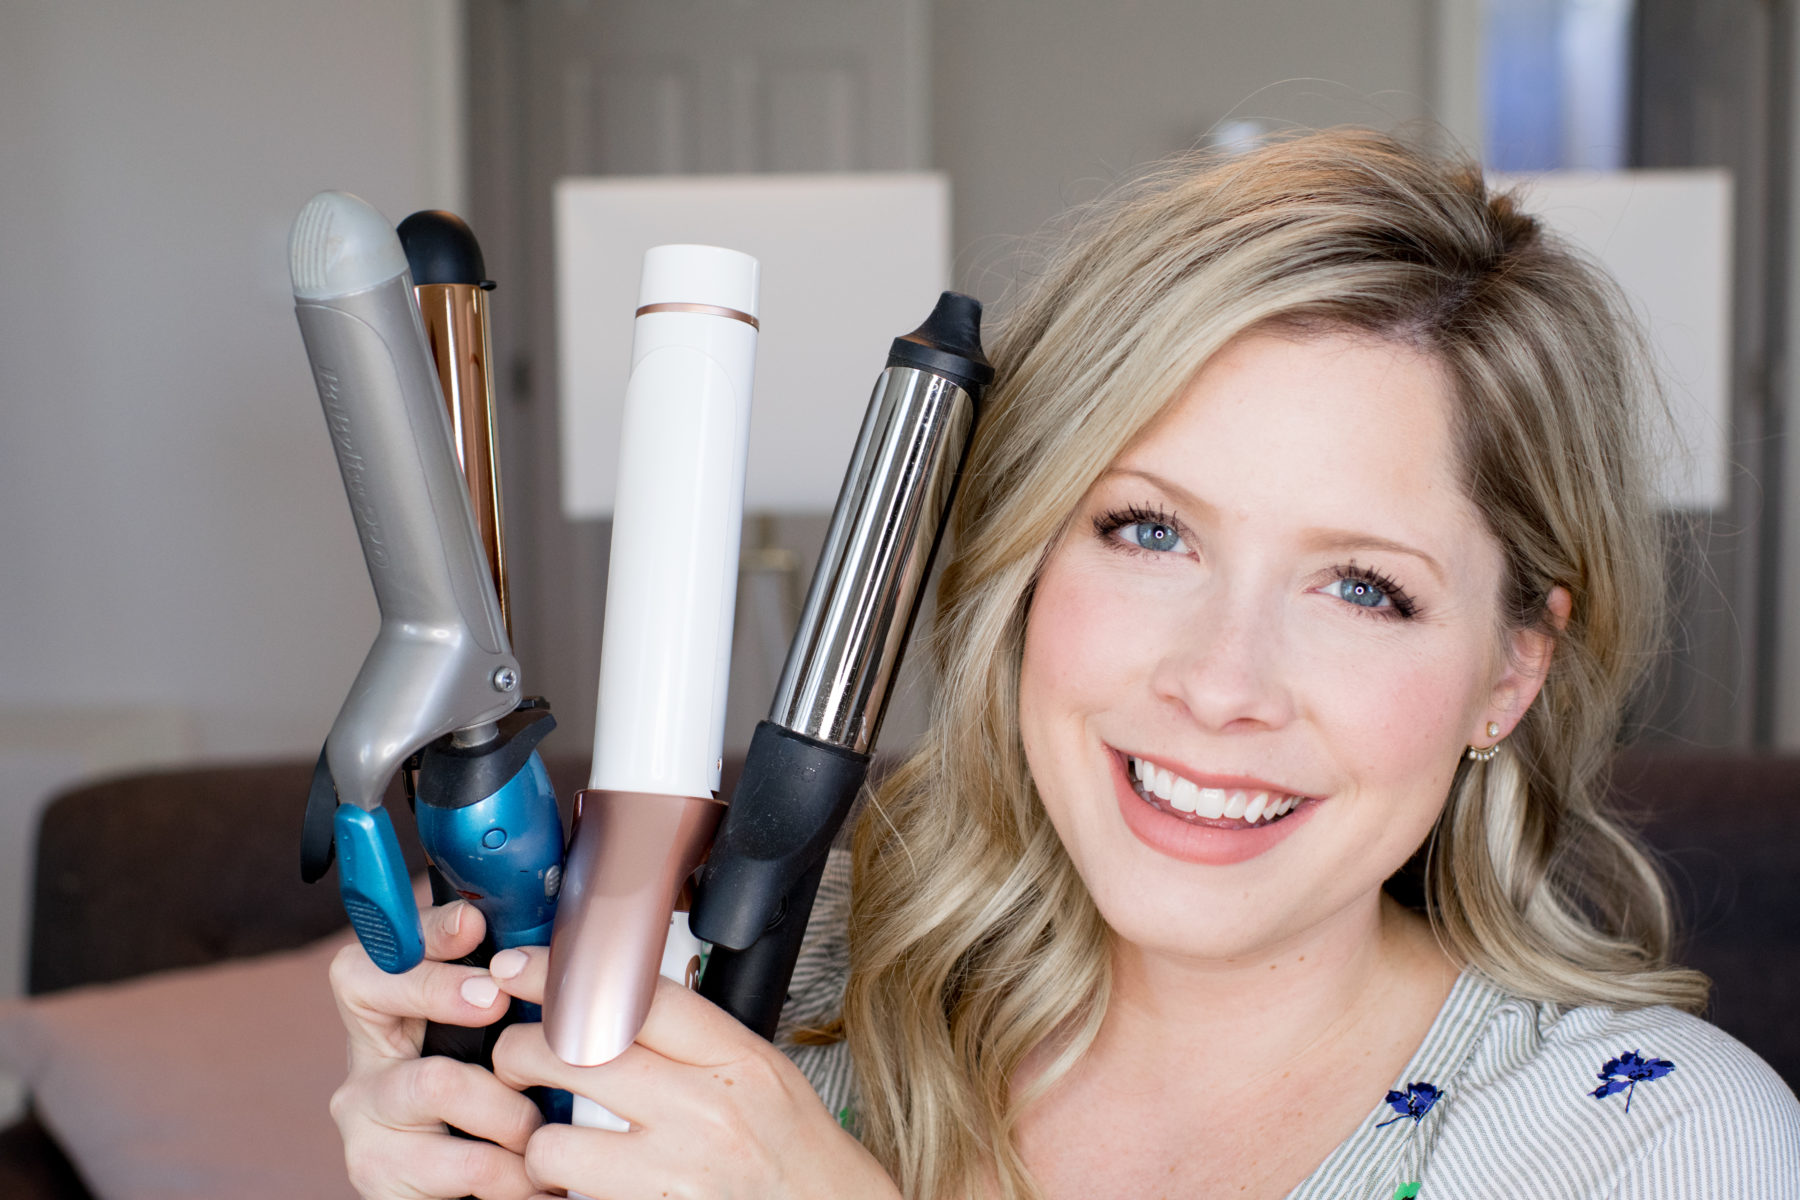 Budget to splurge: comparing 4 curling irons